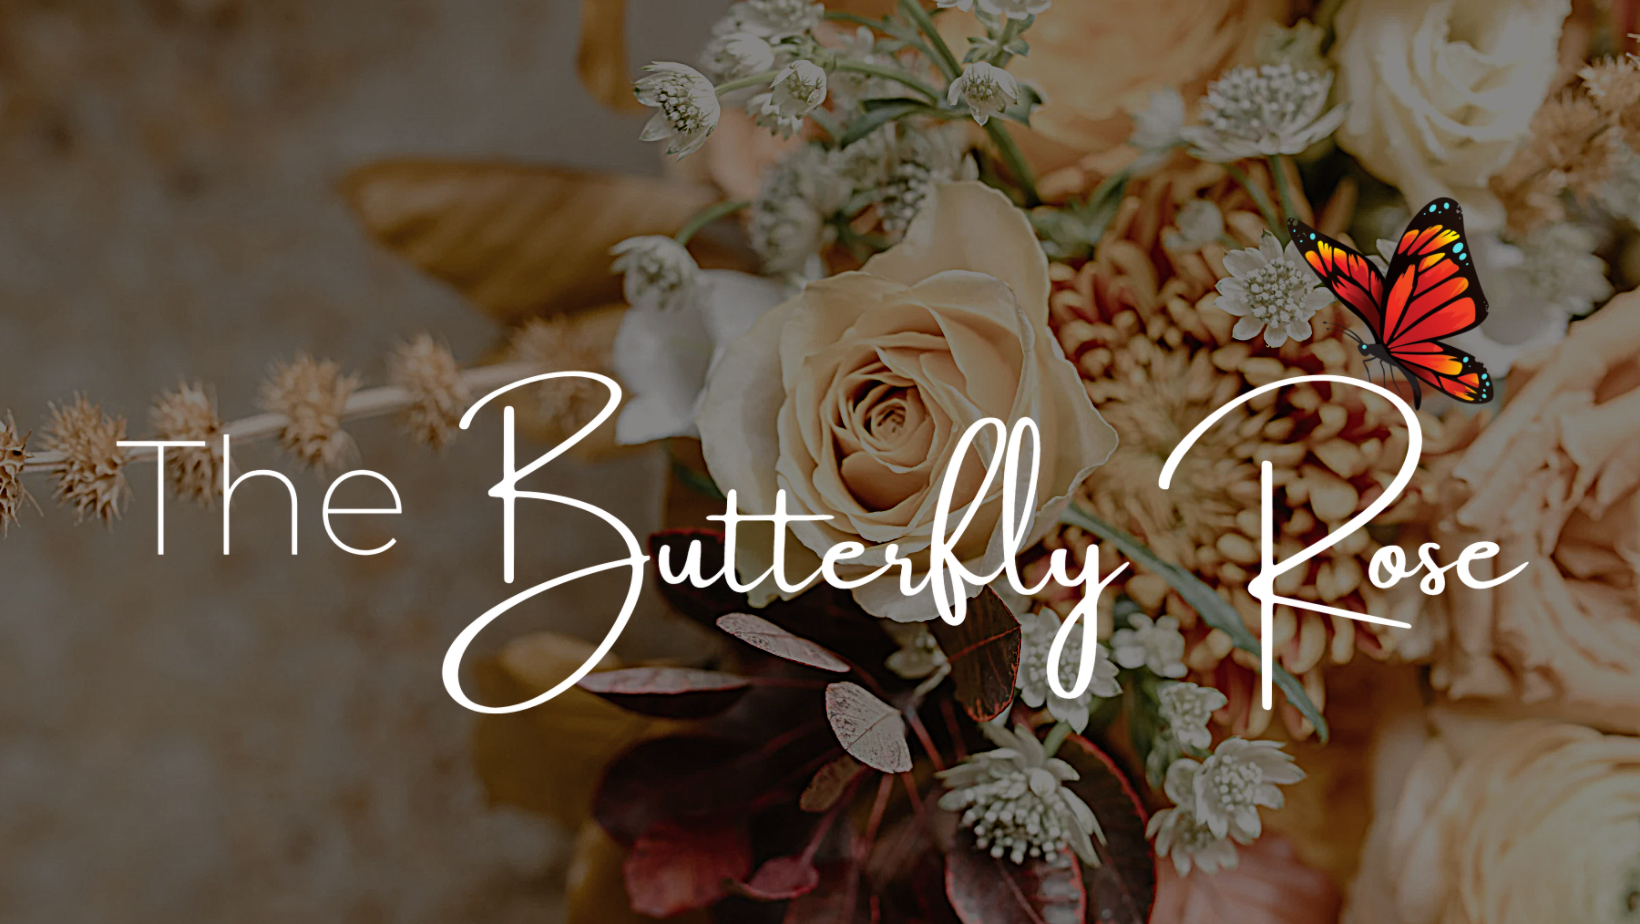 Lawrenceville Florist - Flower Delivery by The Butterfly Rose